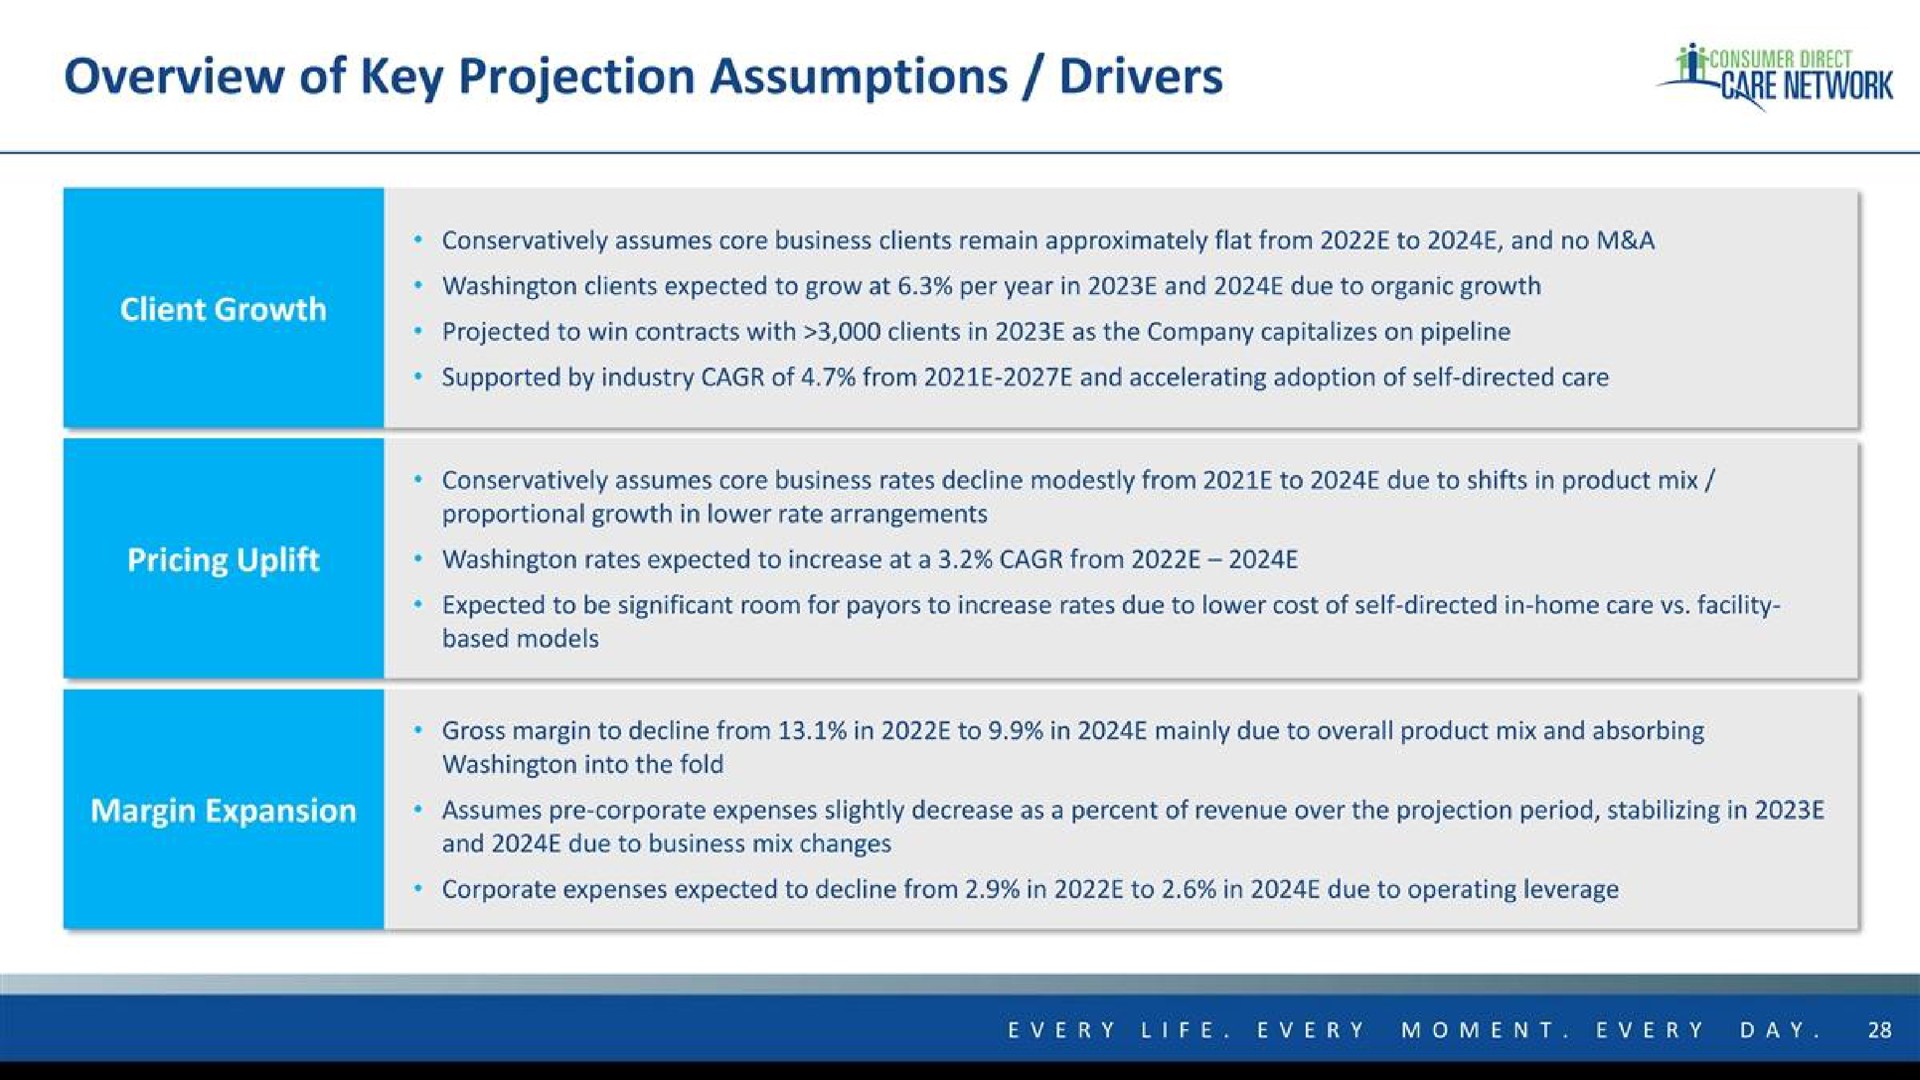 overview of key projection assumptions drivers sare network | Consumer Direct Care Network